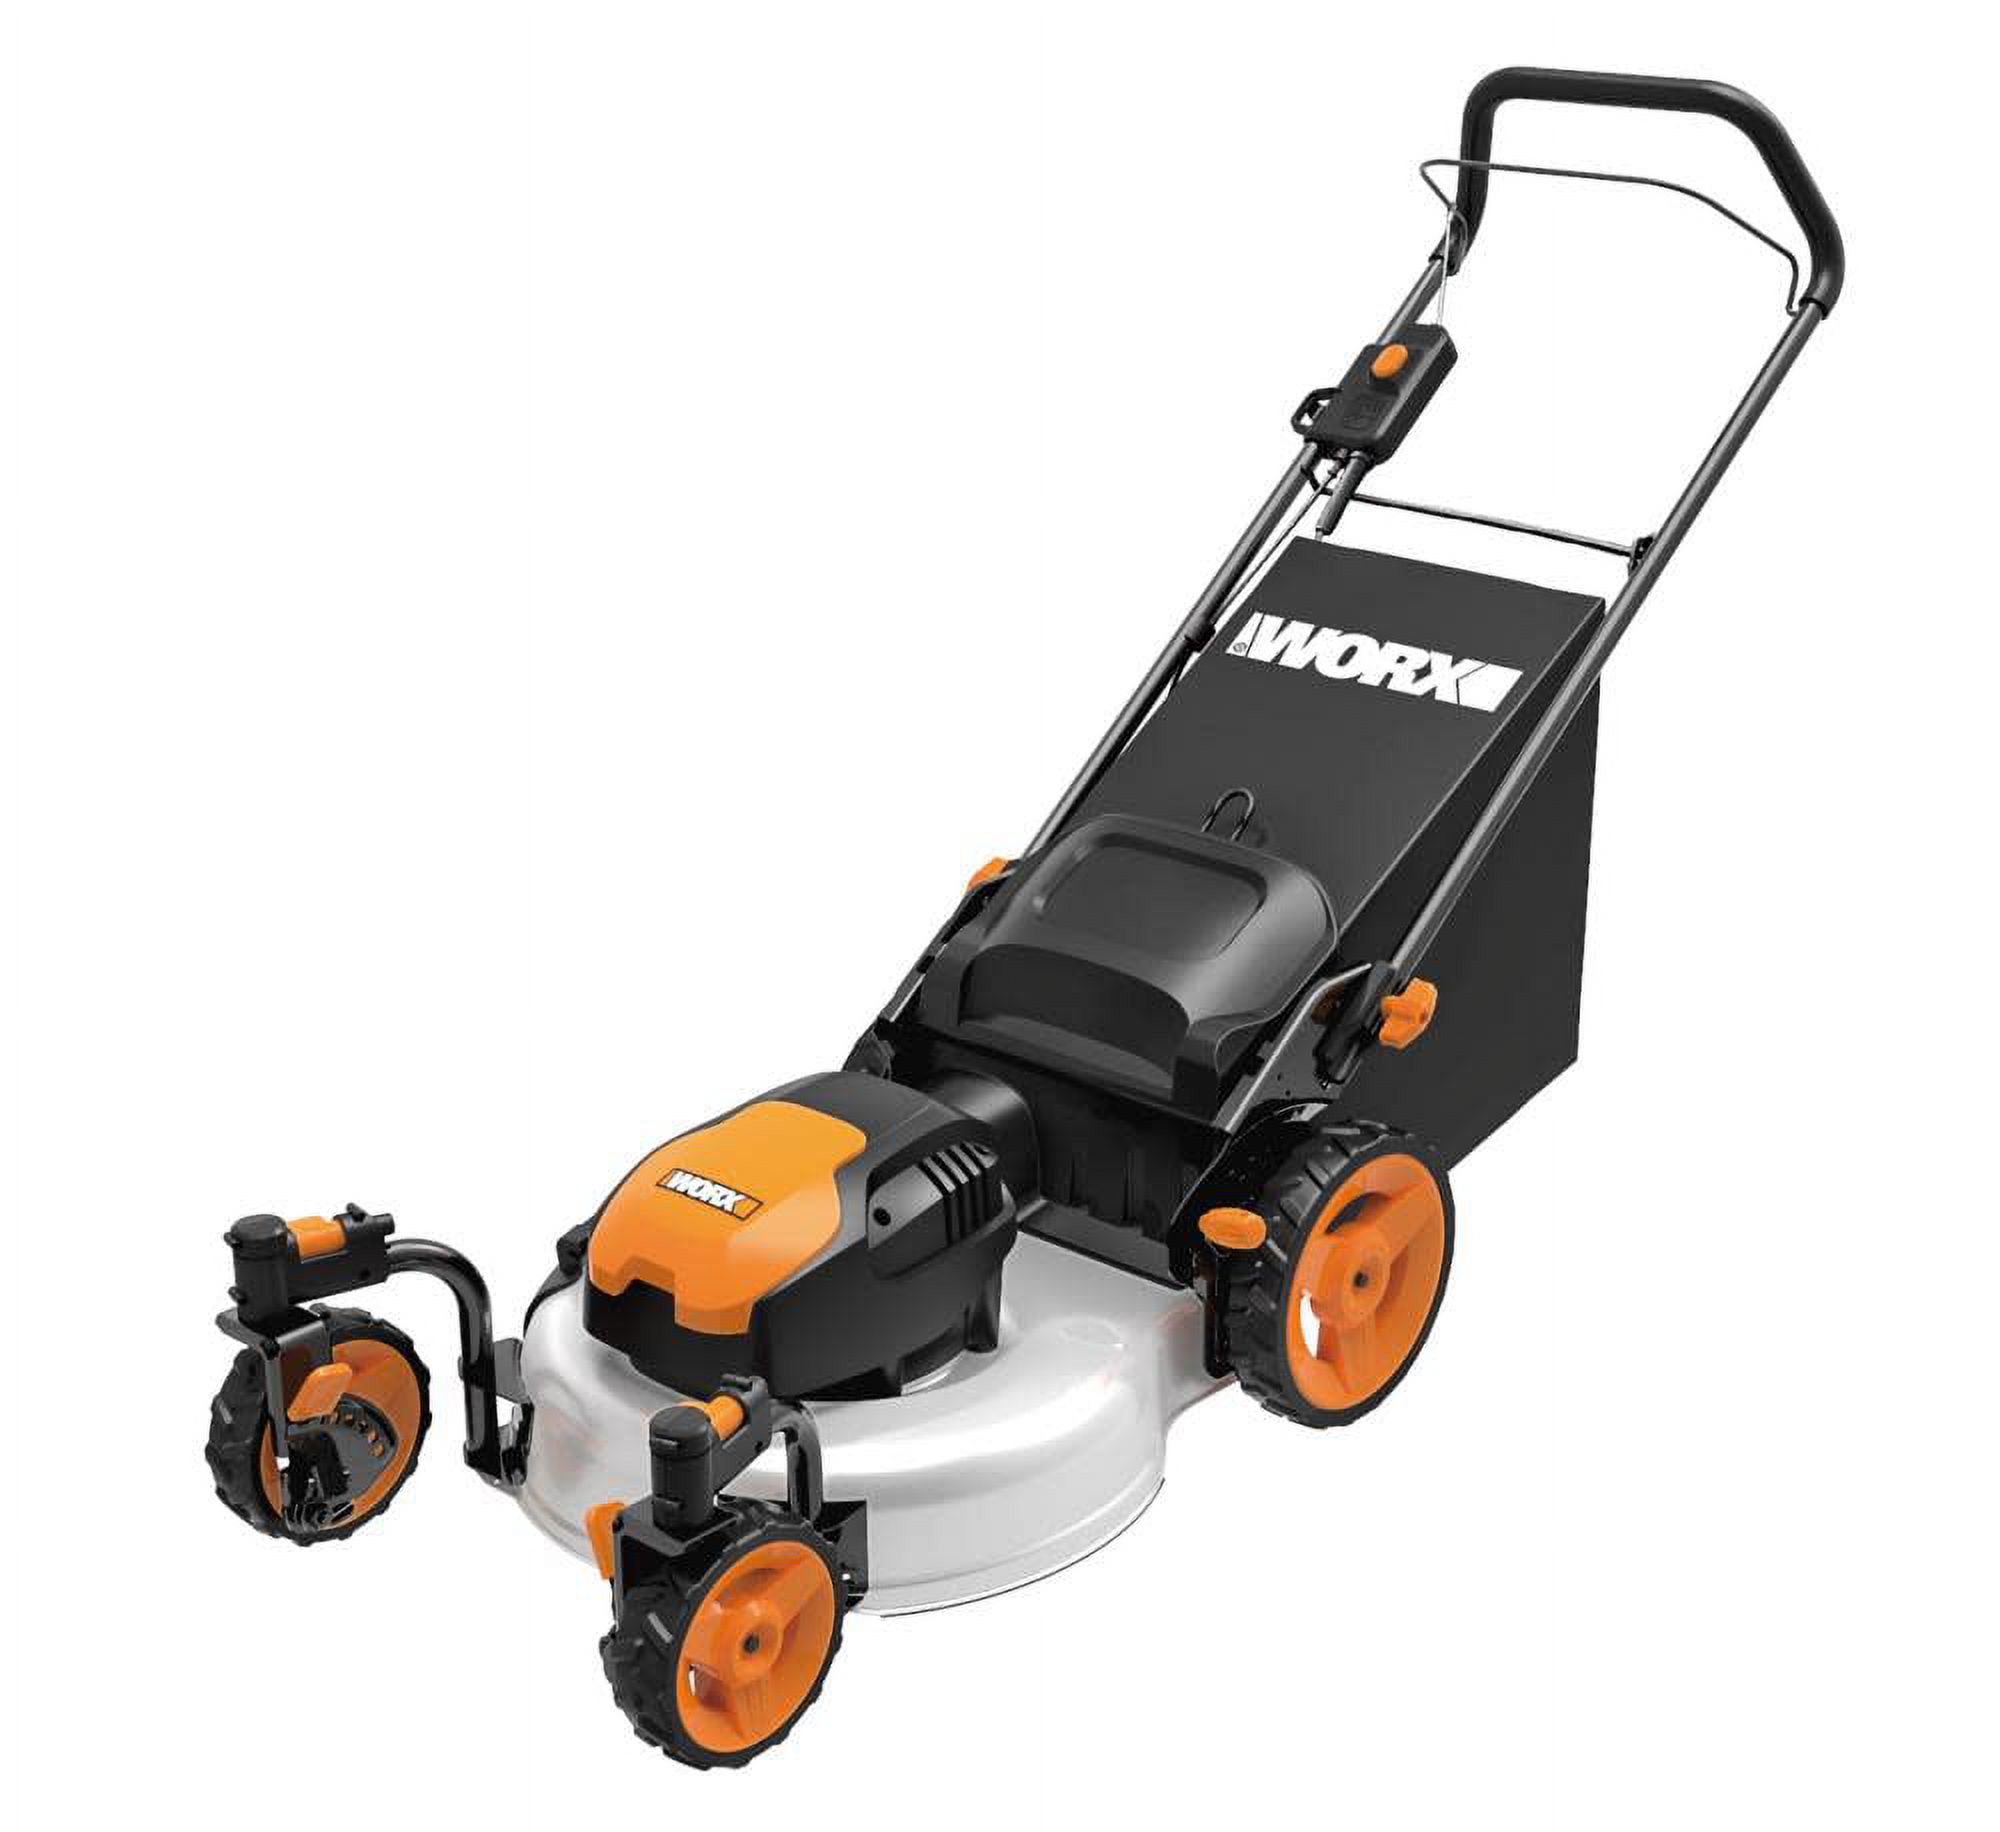 Worx 19In 13Amp Caster Wheeled Electric Lawn Mower - image 1 of 4